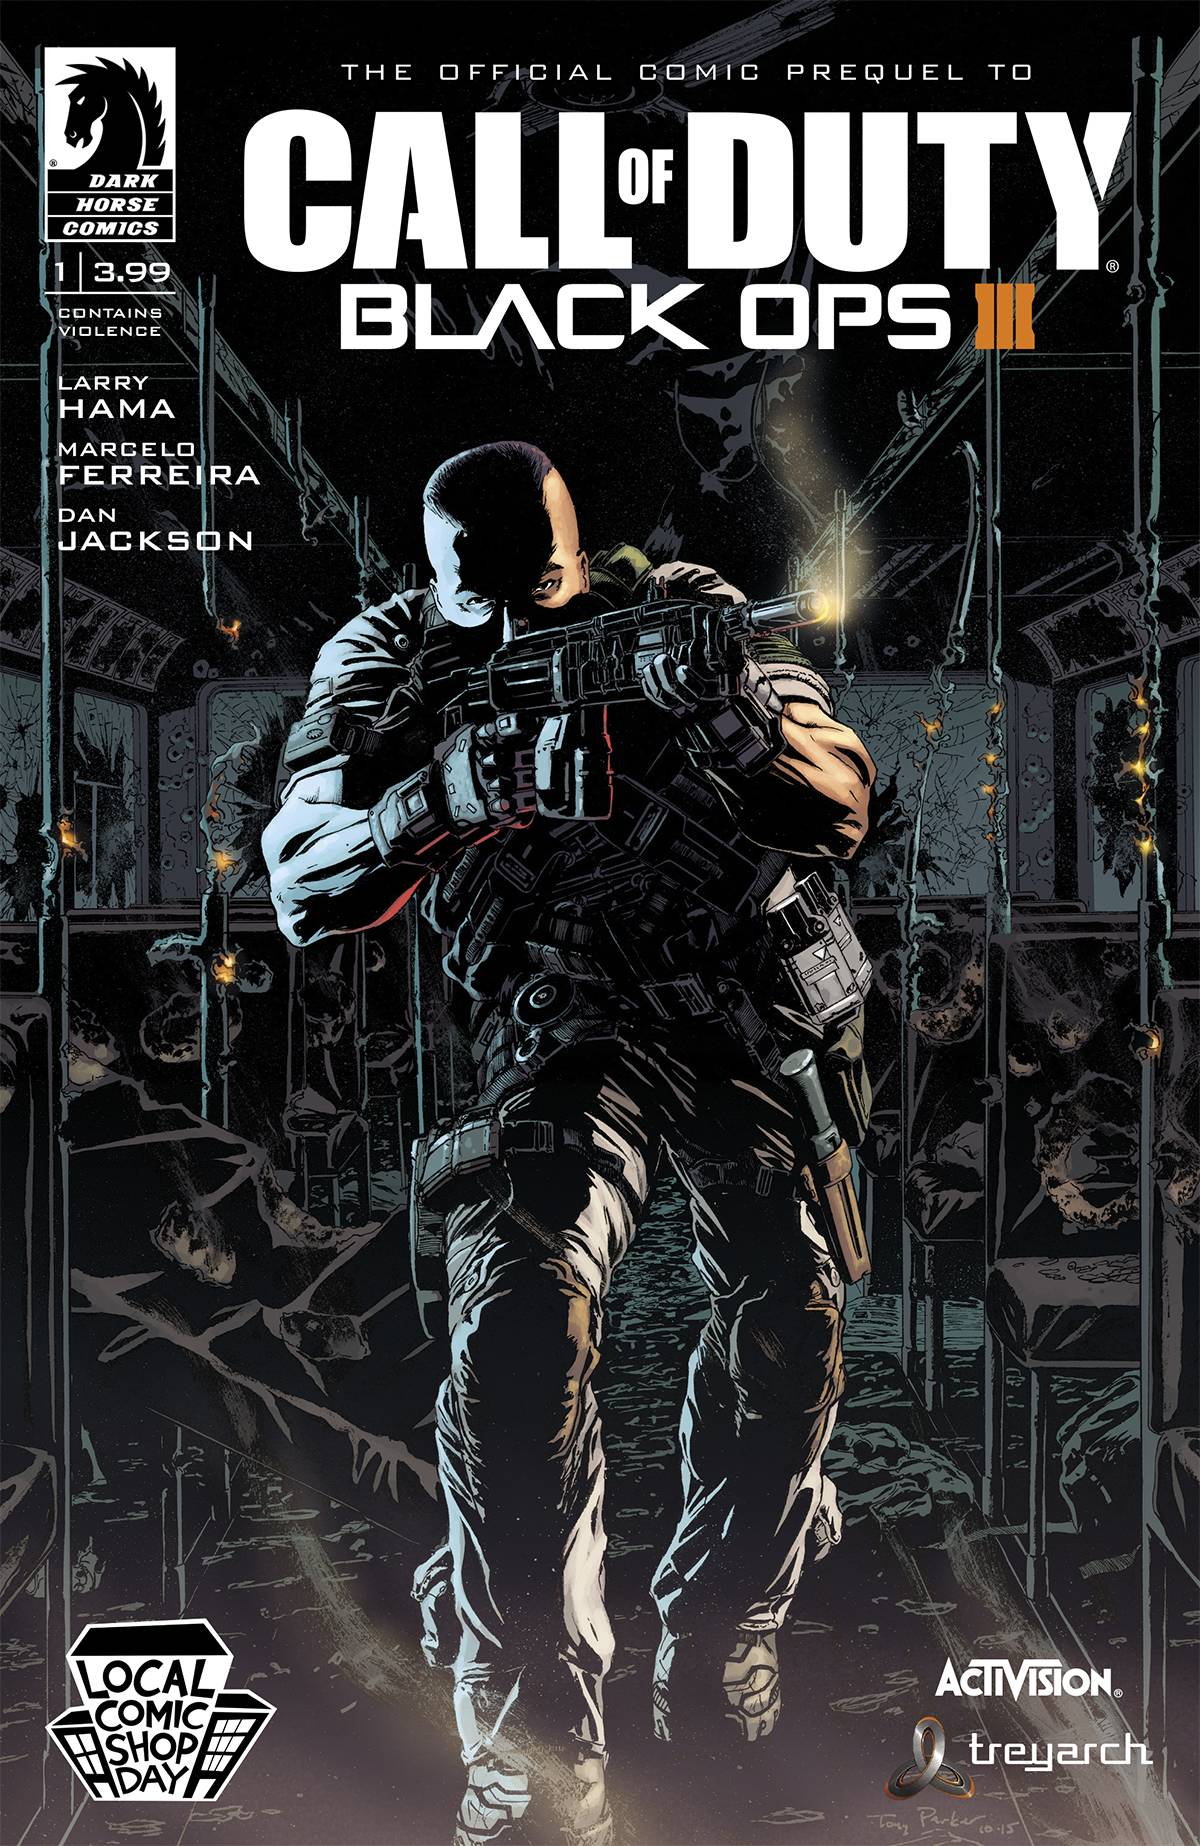 Local Comic Shop Day 2015 Call of Duty Black Ops III #1 #1 (Of 6)